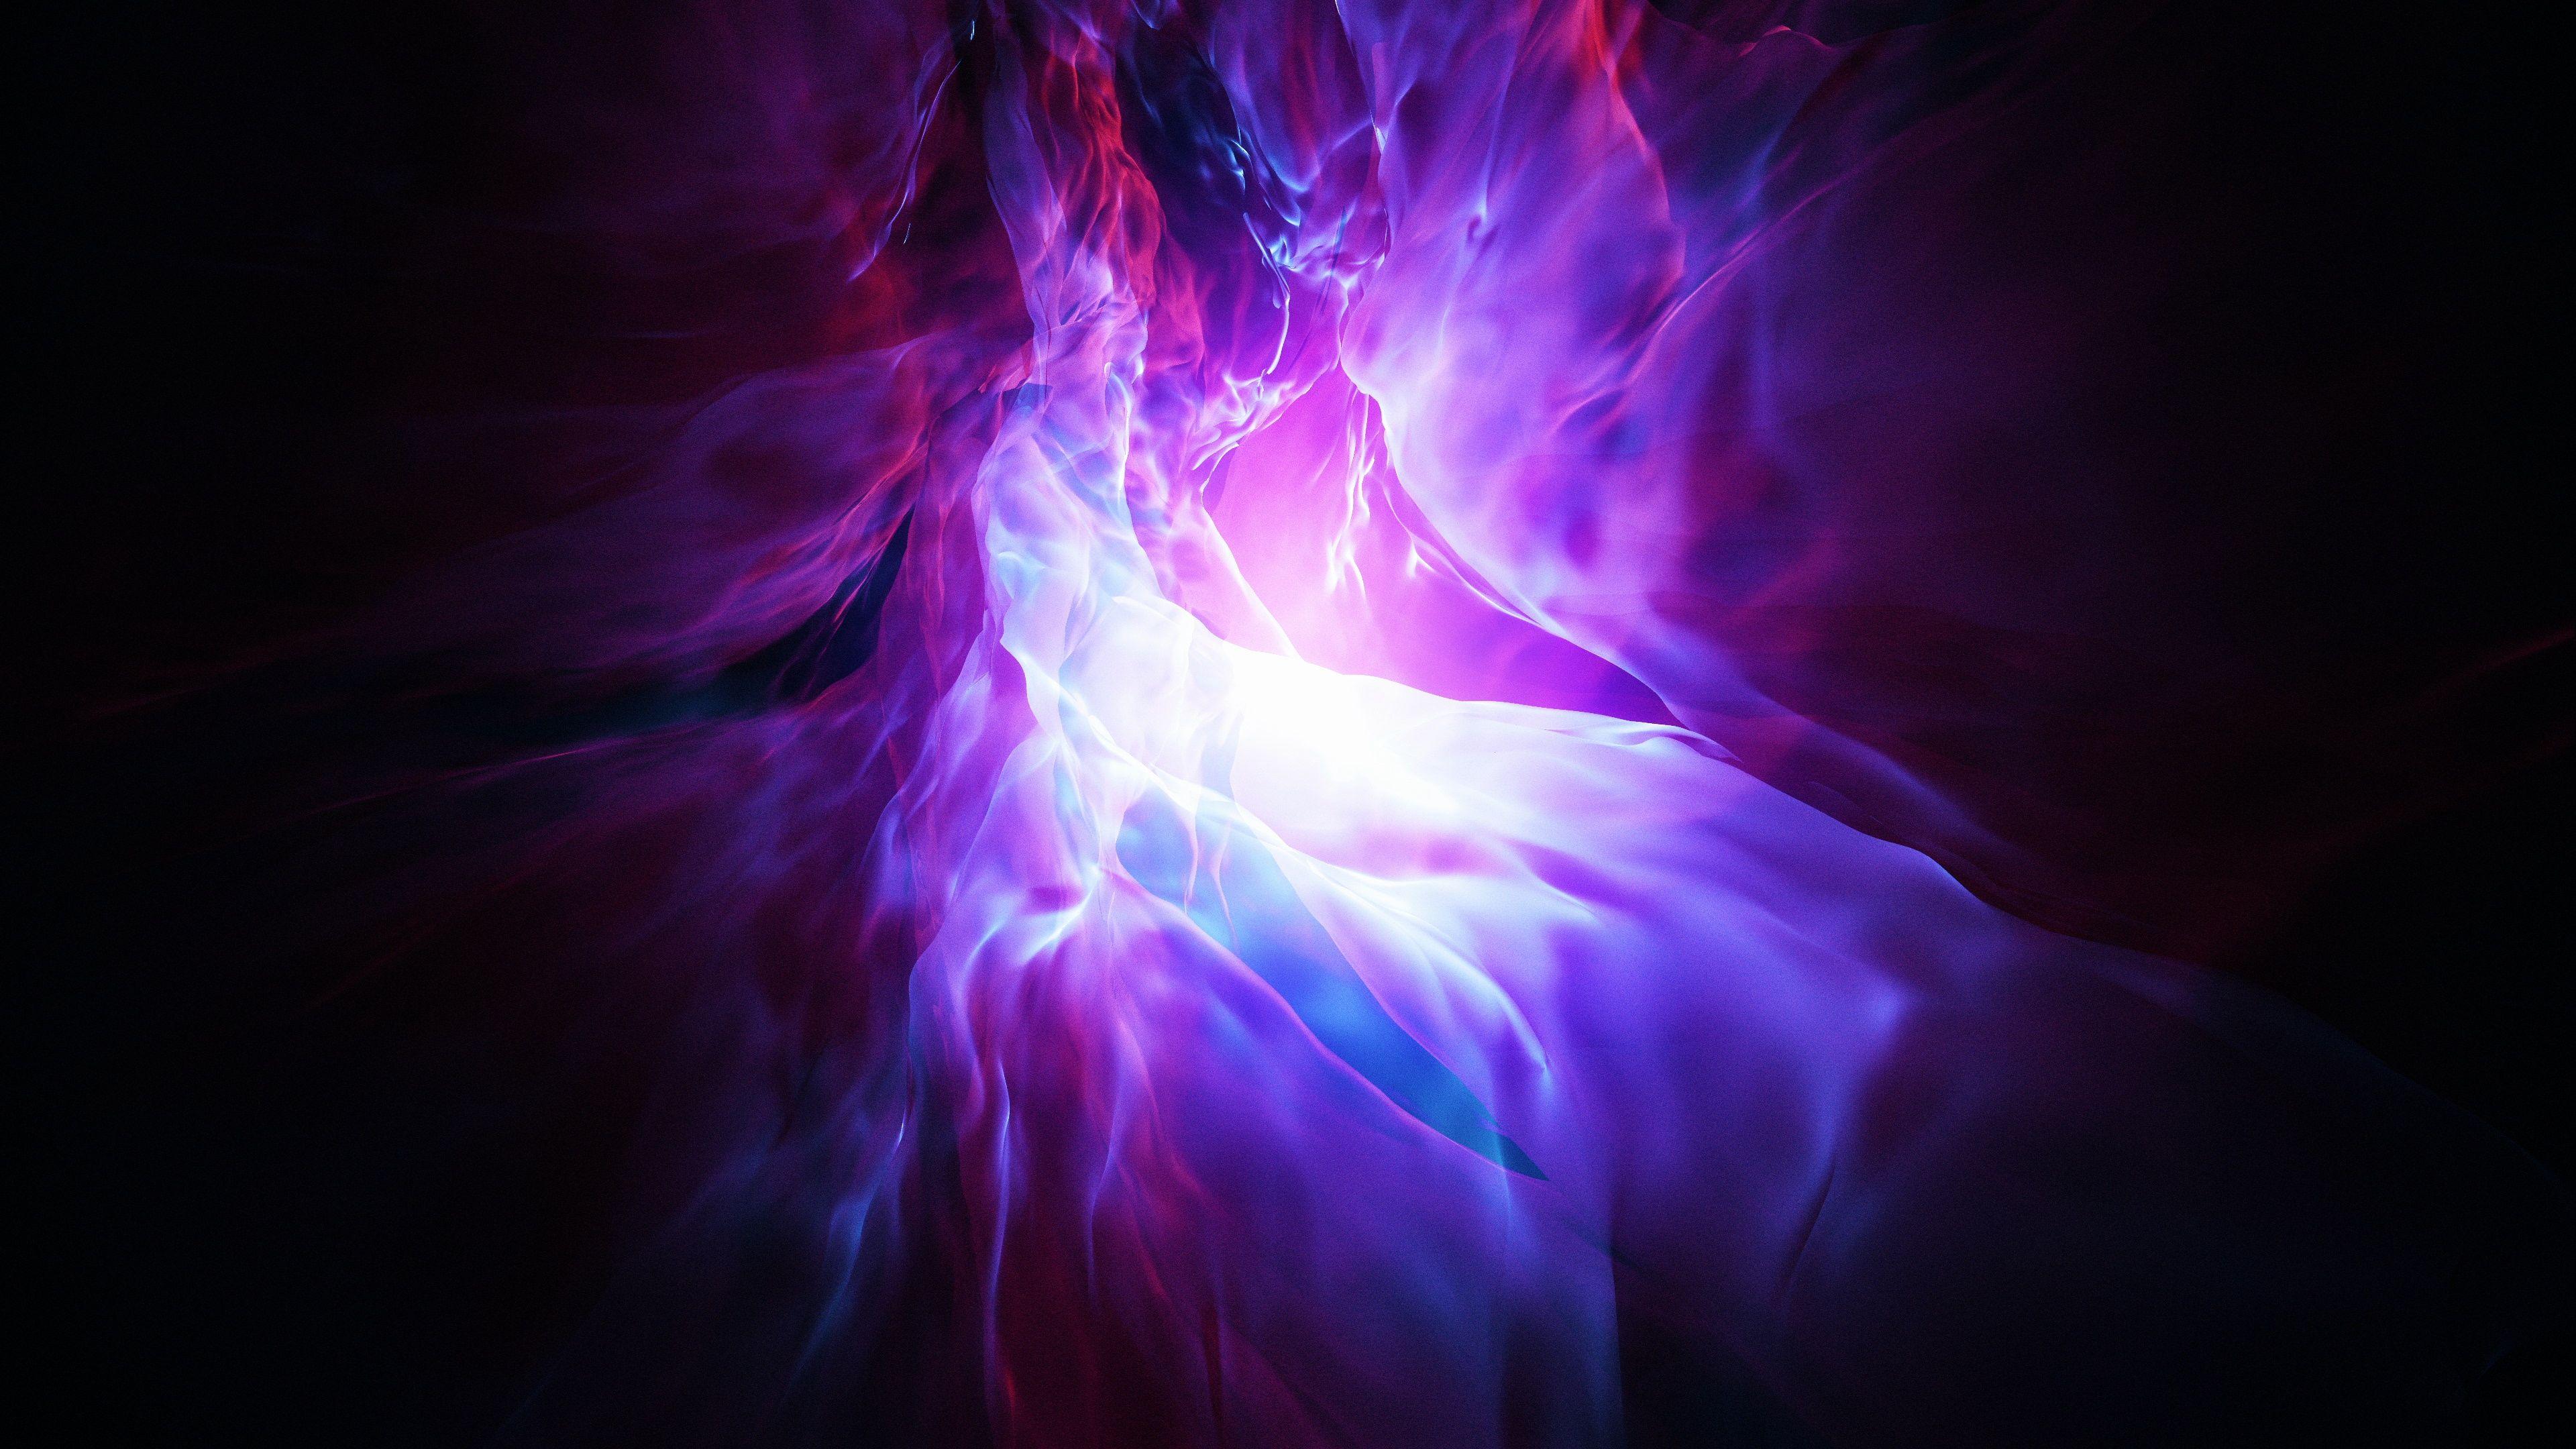 Magenta Flame Logo - Blue Magenta Abstract Liquid Flame Background Loop ~ Footage #85874528